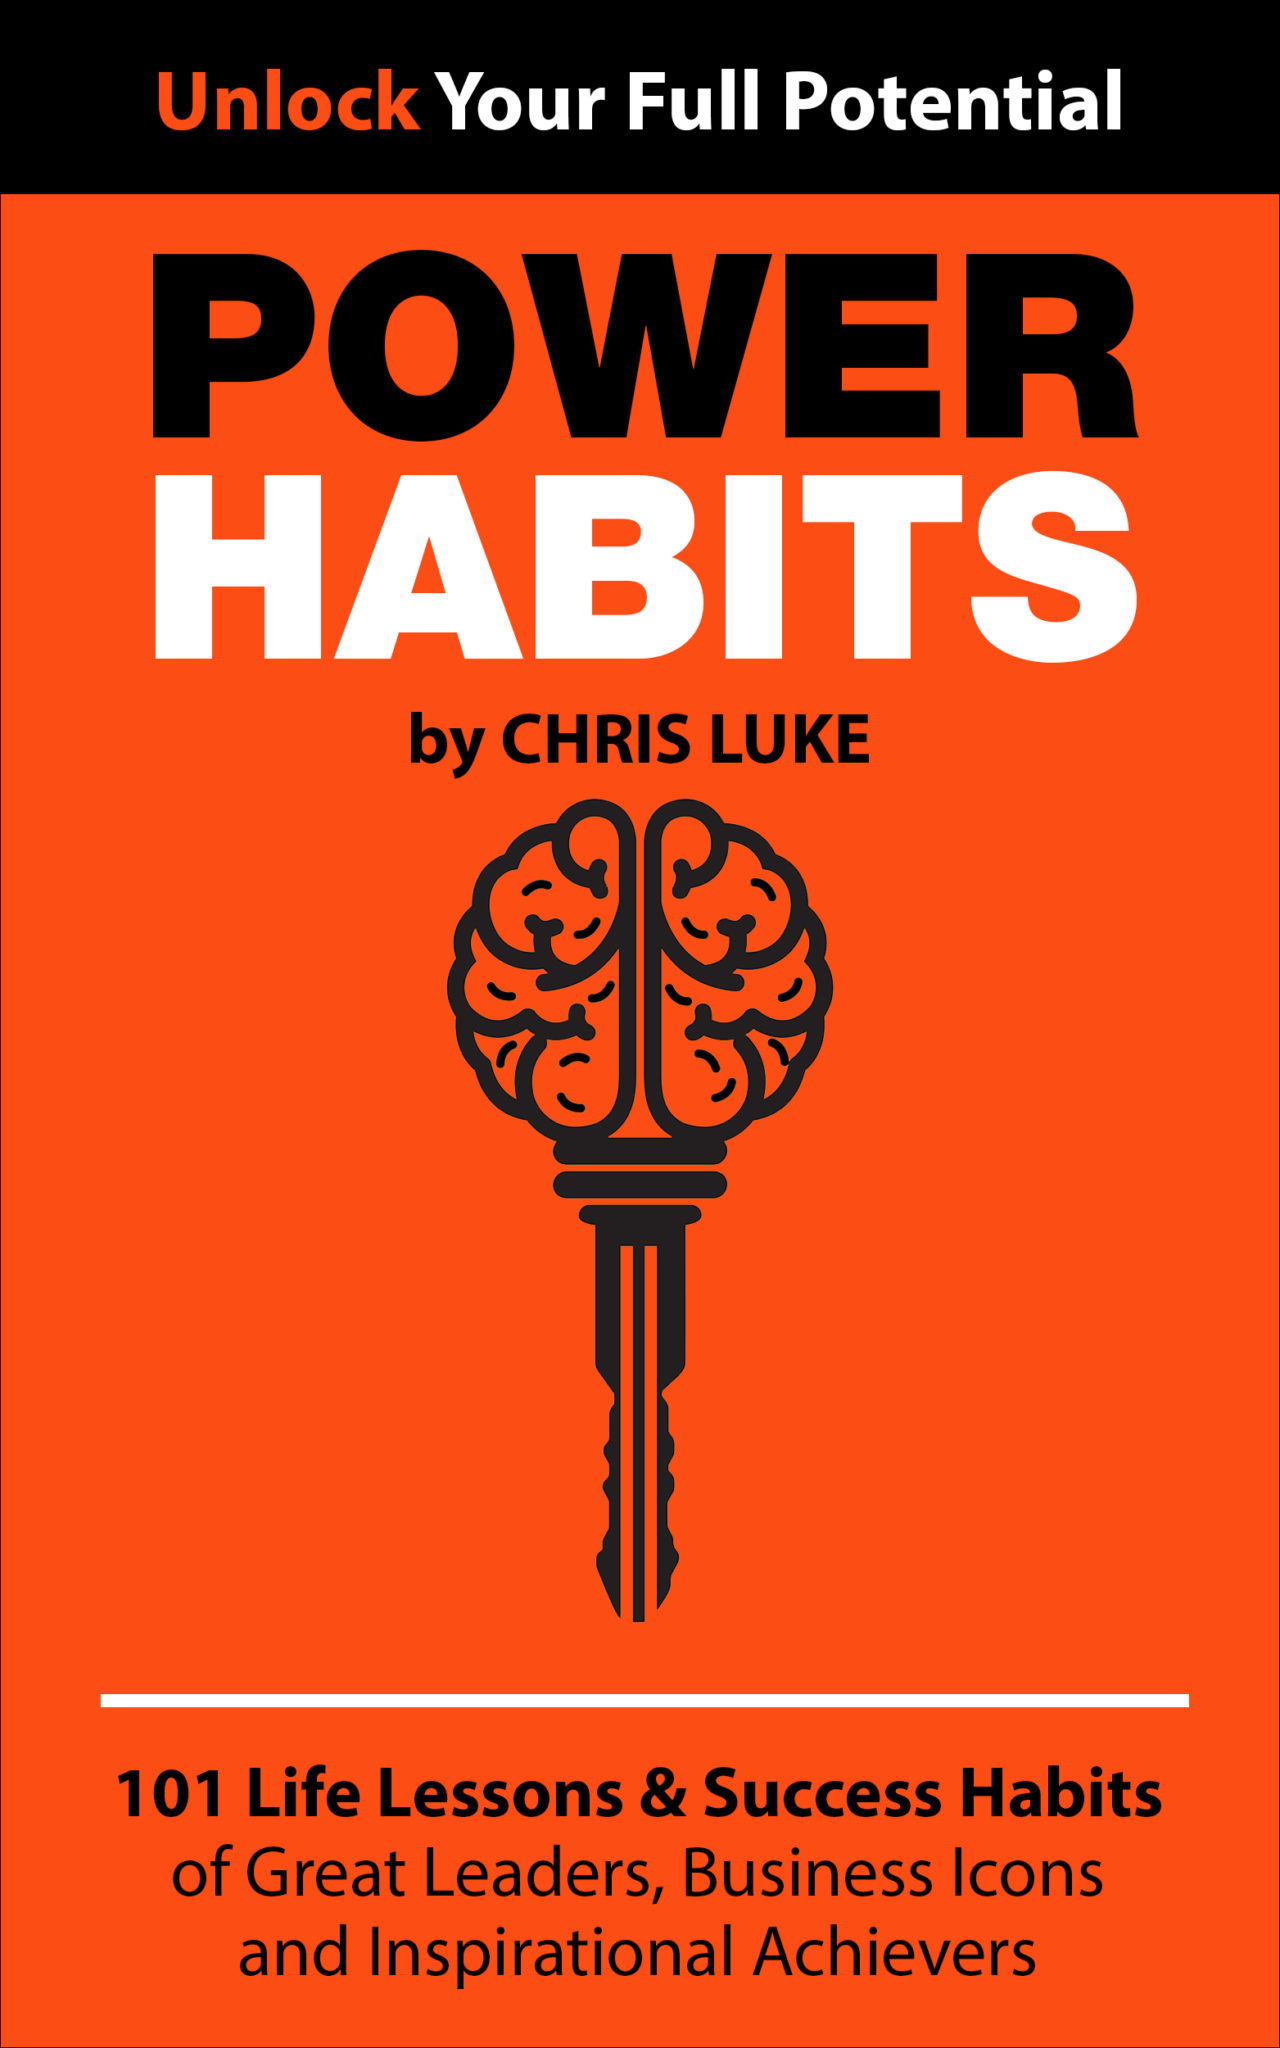 FREE: Power Habits: 101 Life Lessons & Success Habits of Great Leaders, Business Icons and Inspirational Achievers by Chris Luke